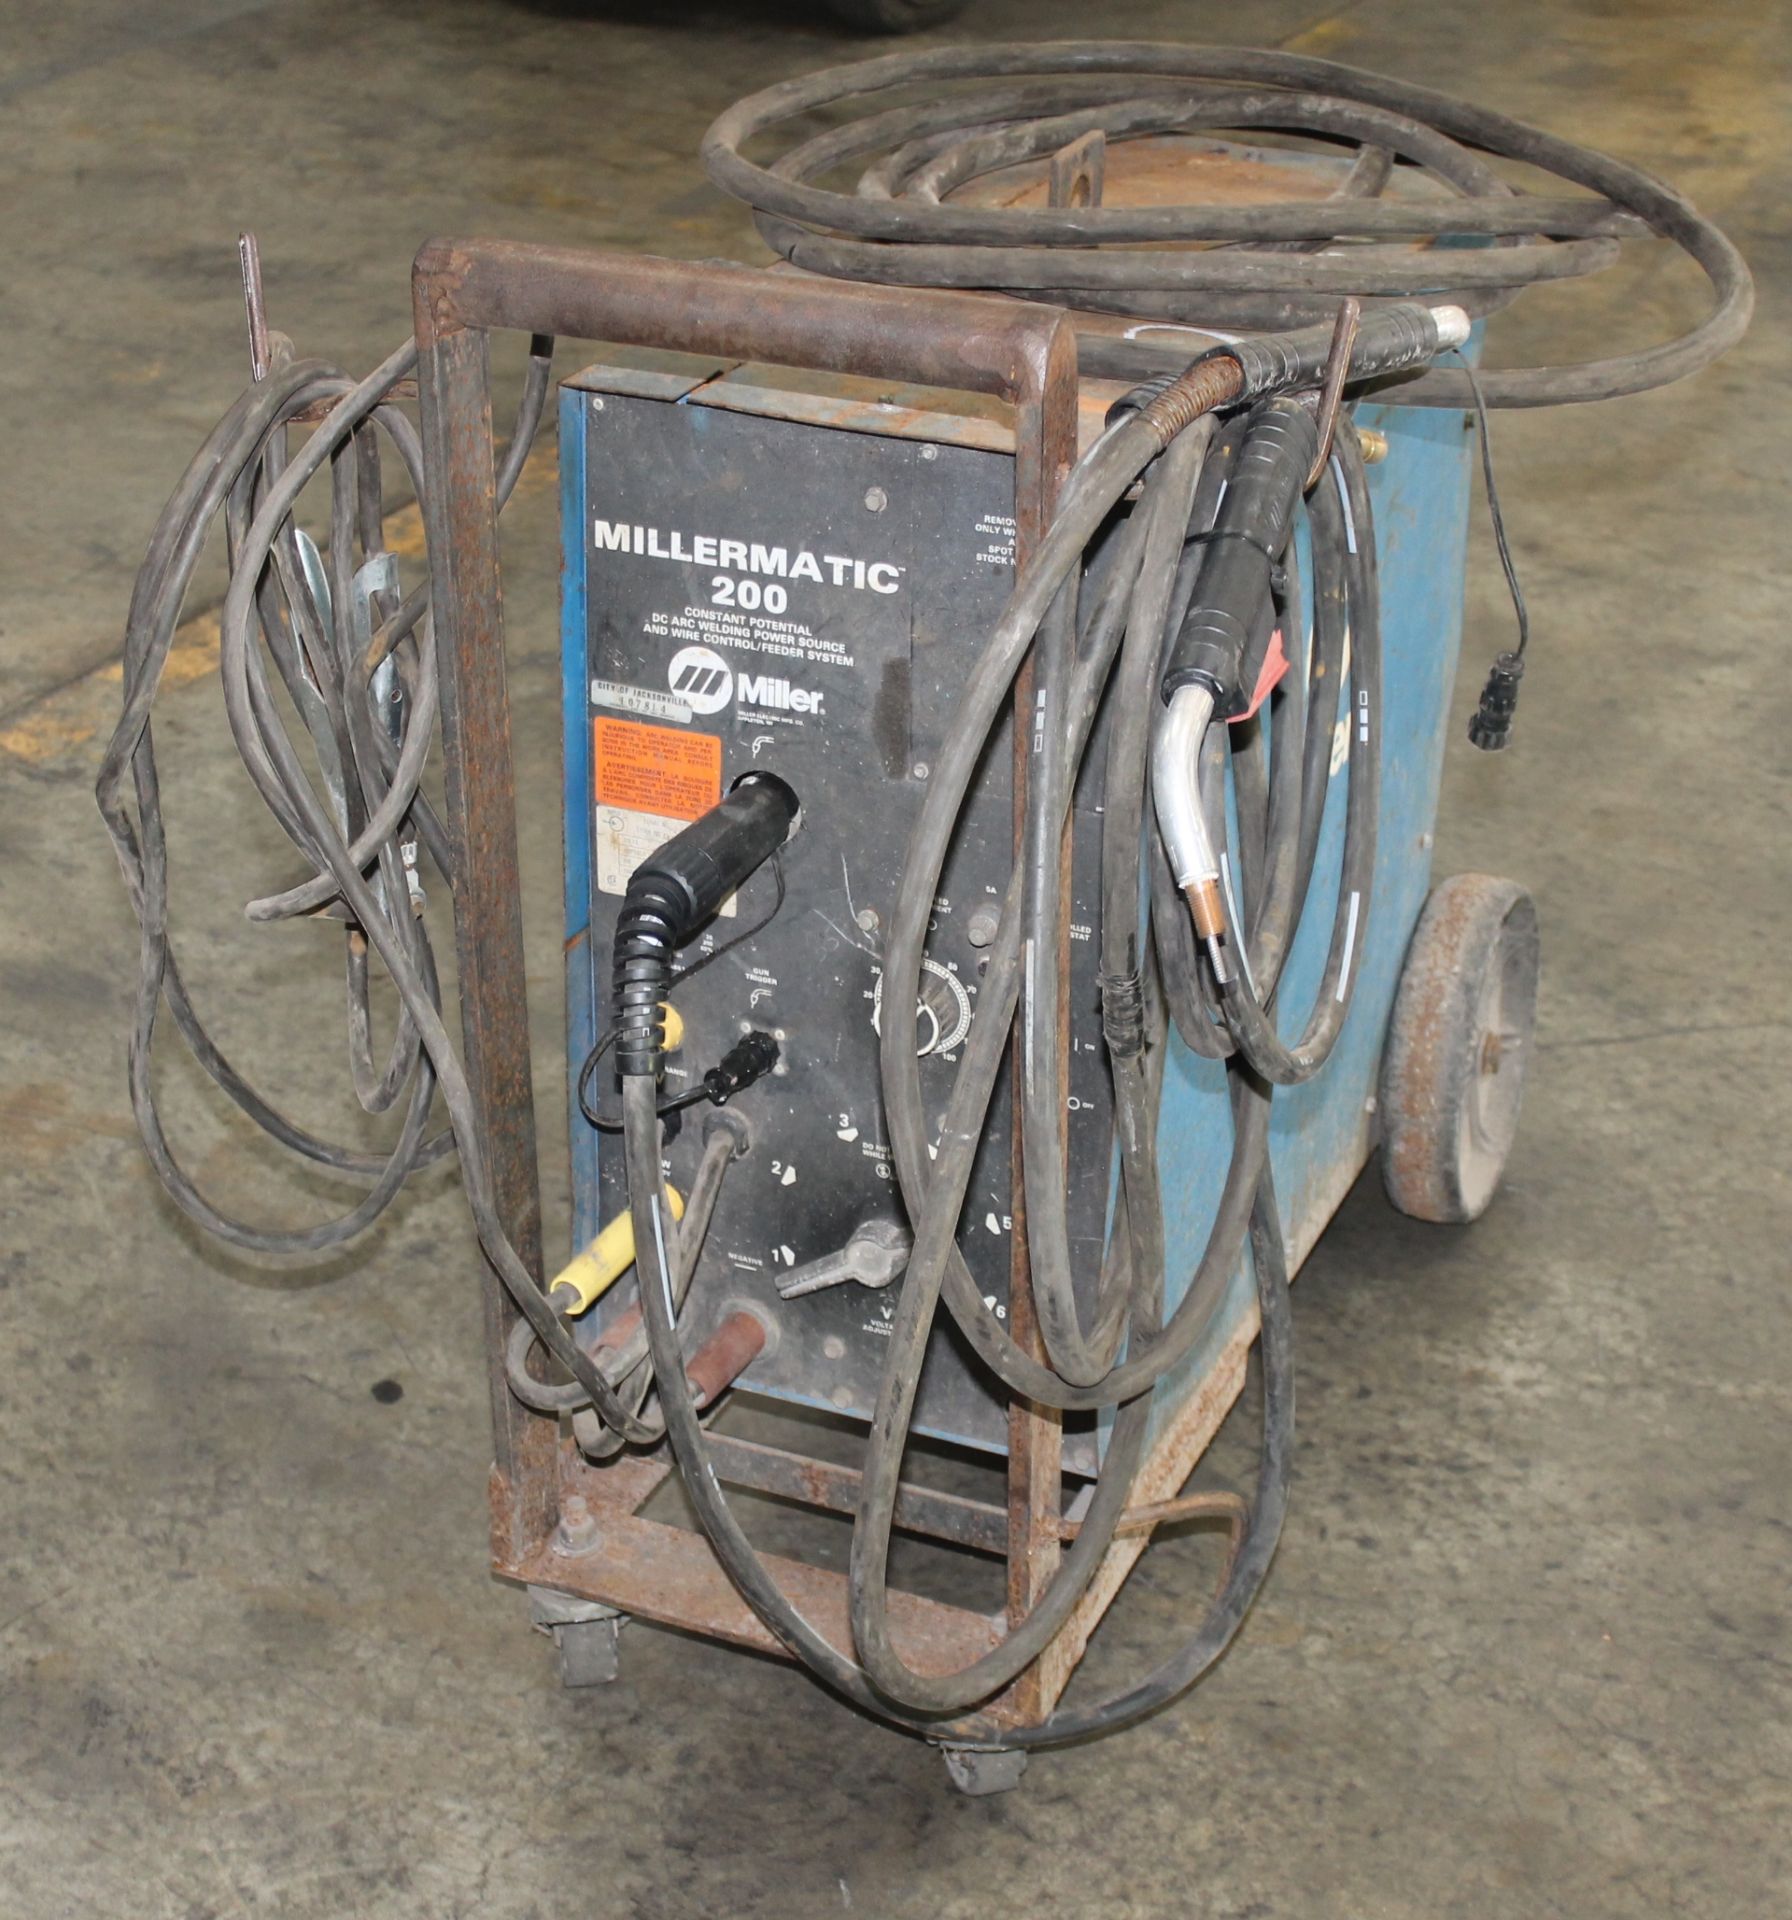 MILLER MILLERMATIC 200 CONSTANT POTENTIAL DC ARC WELDER, VOLTS: 200/230, AMPS: 46/40, KW: 8.3, 1 PH, - Image 7 of 7